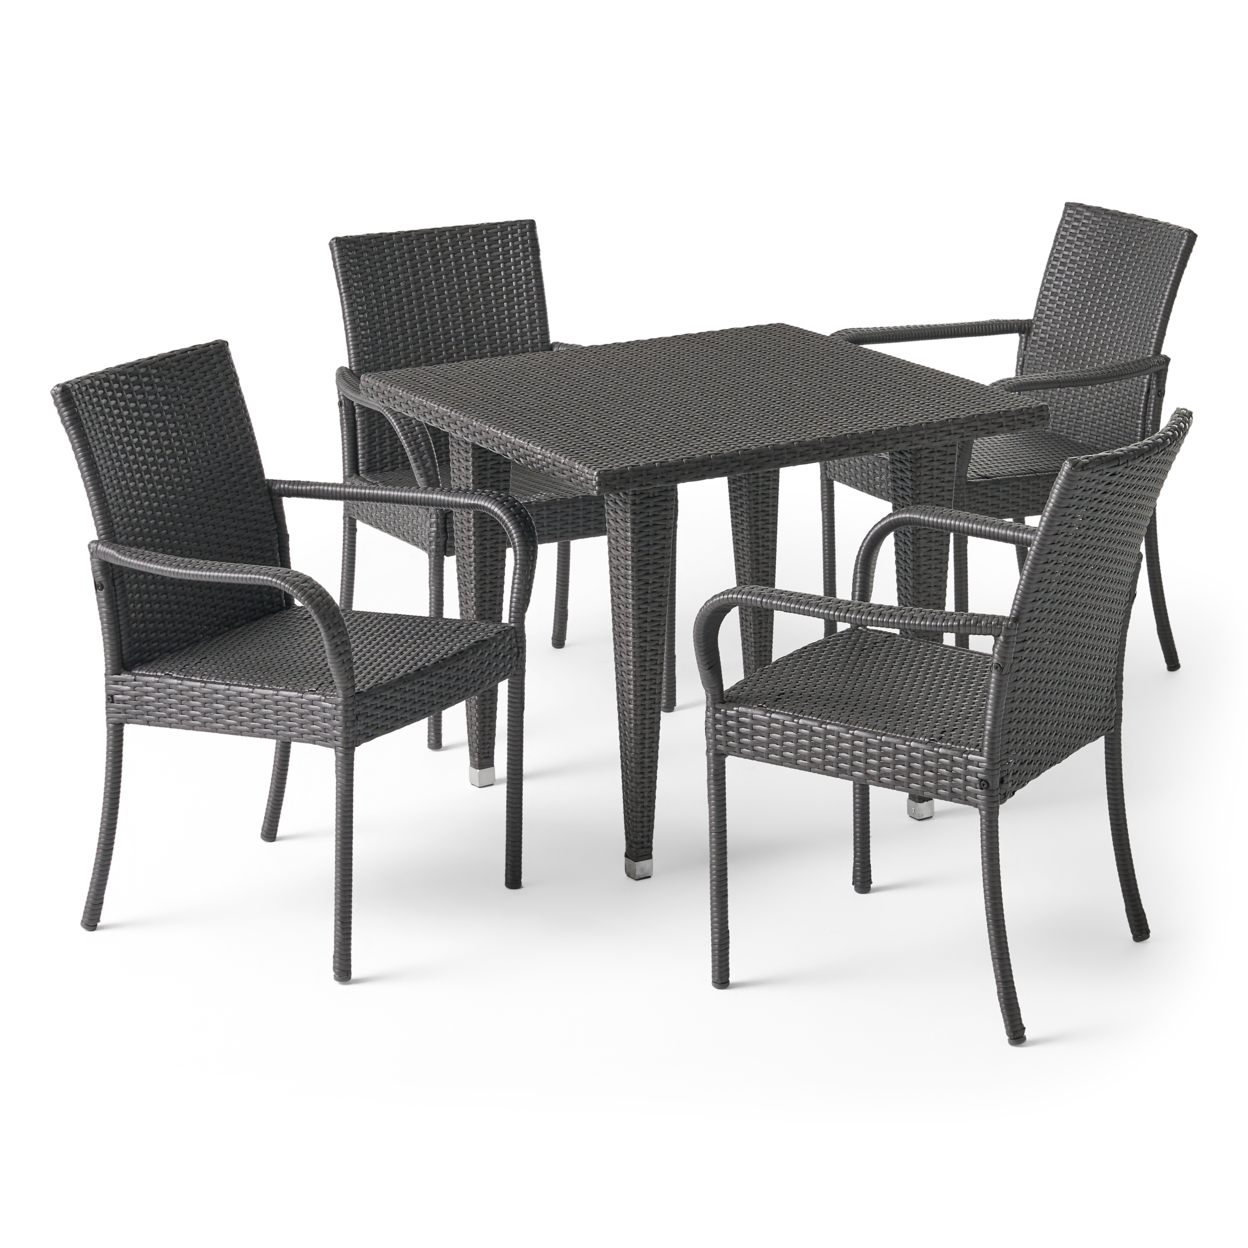 Mumford Outdoor Contemporary 4 Seater Wicker Dining Set - Multi-brown